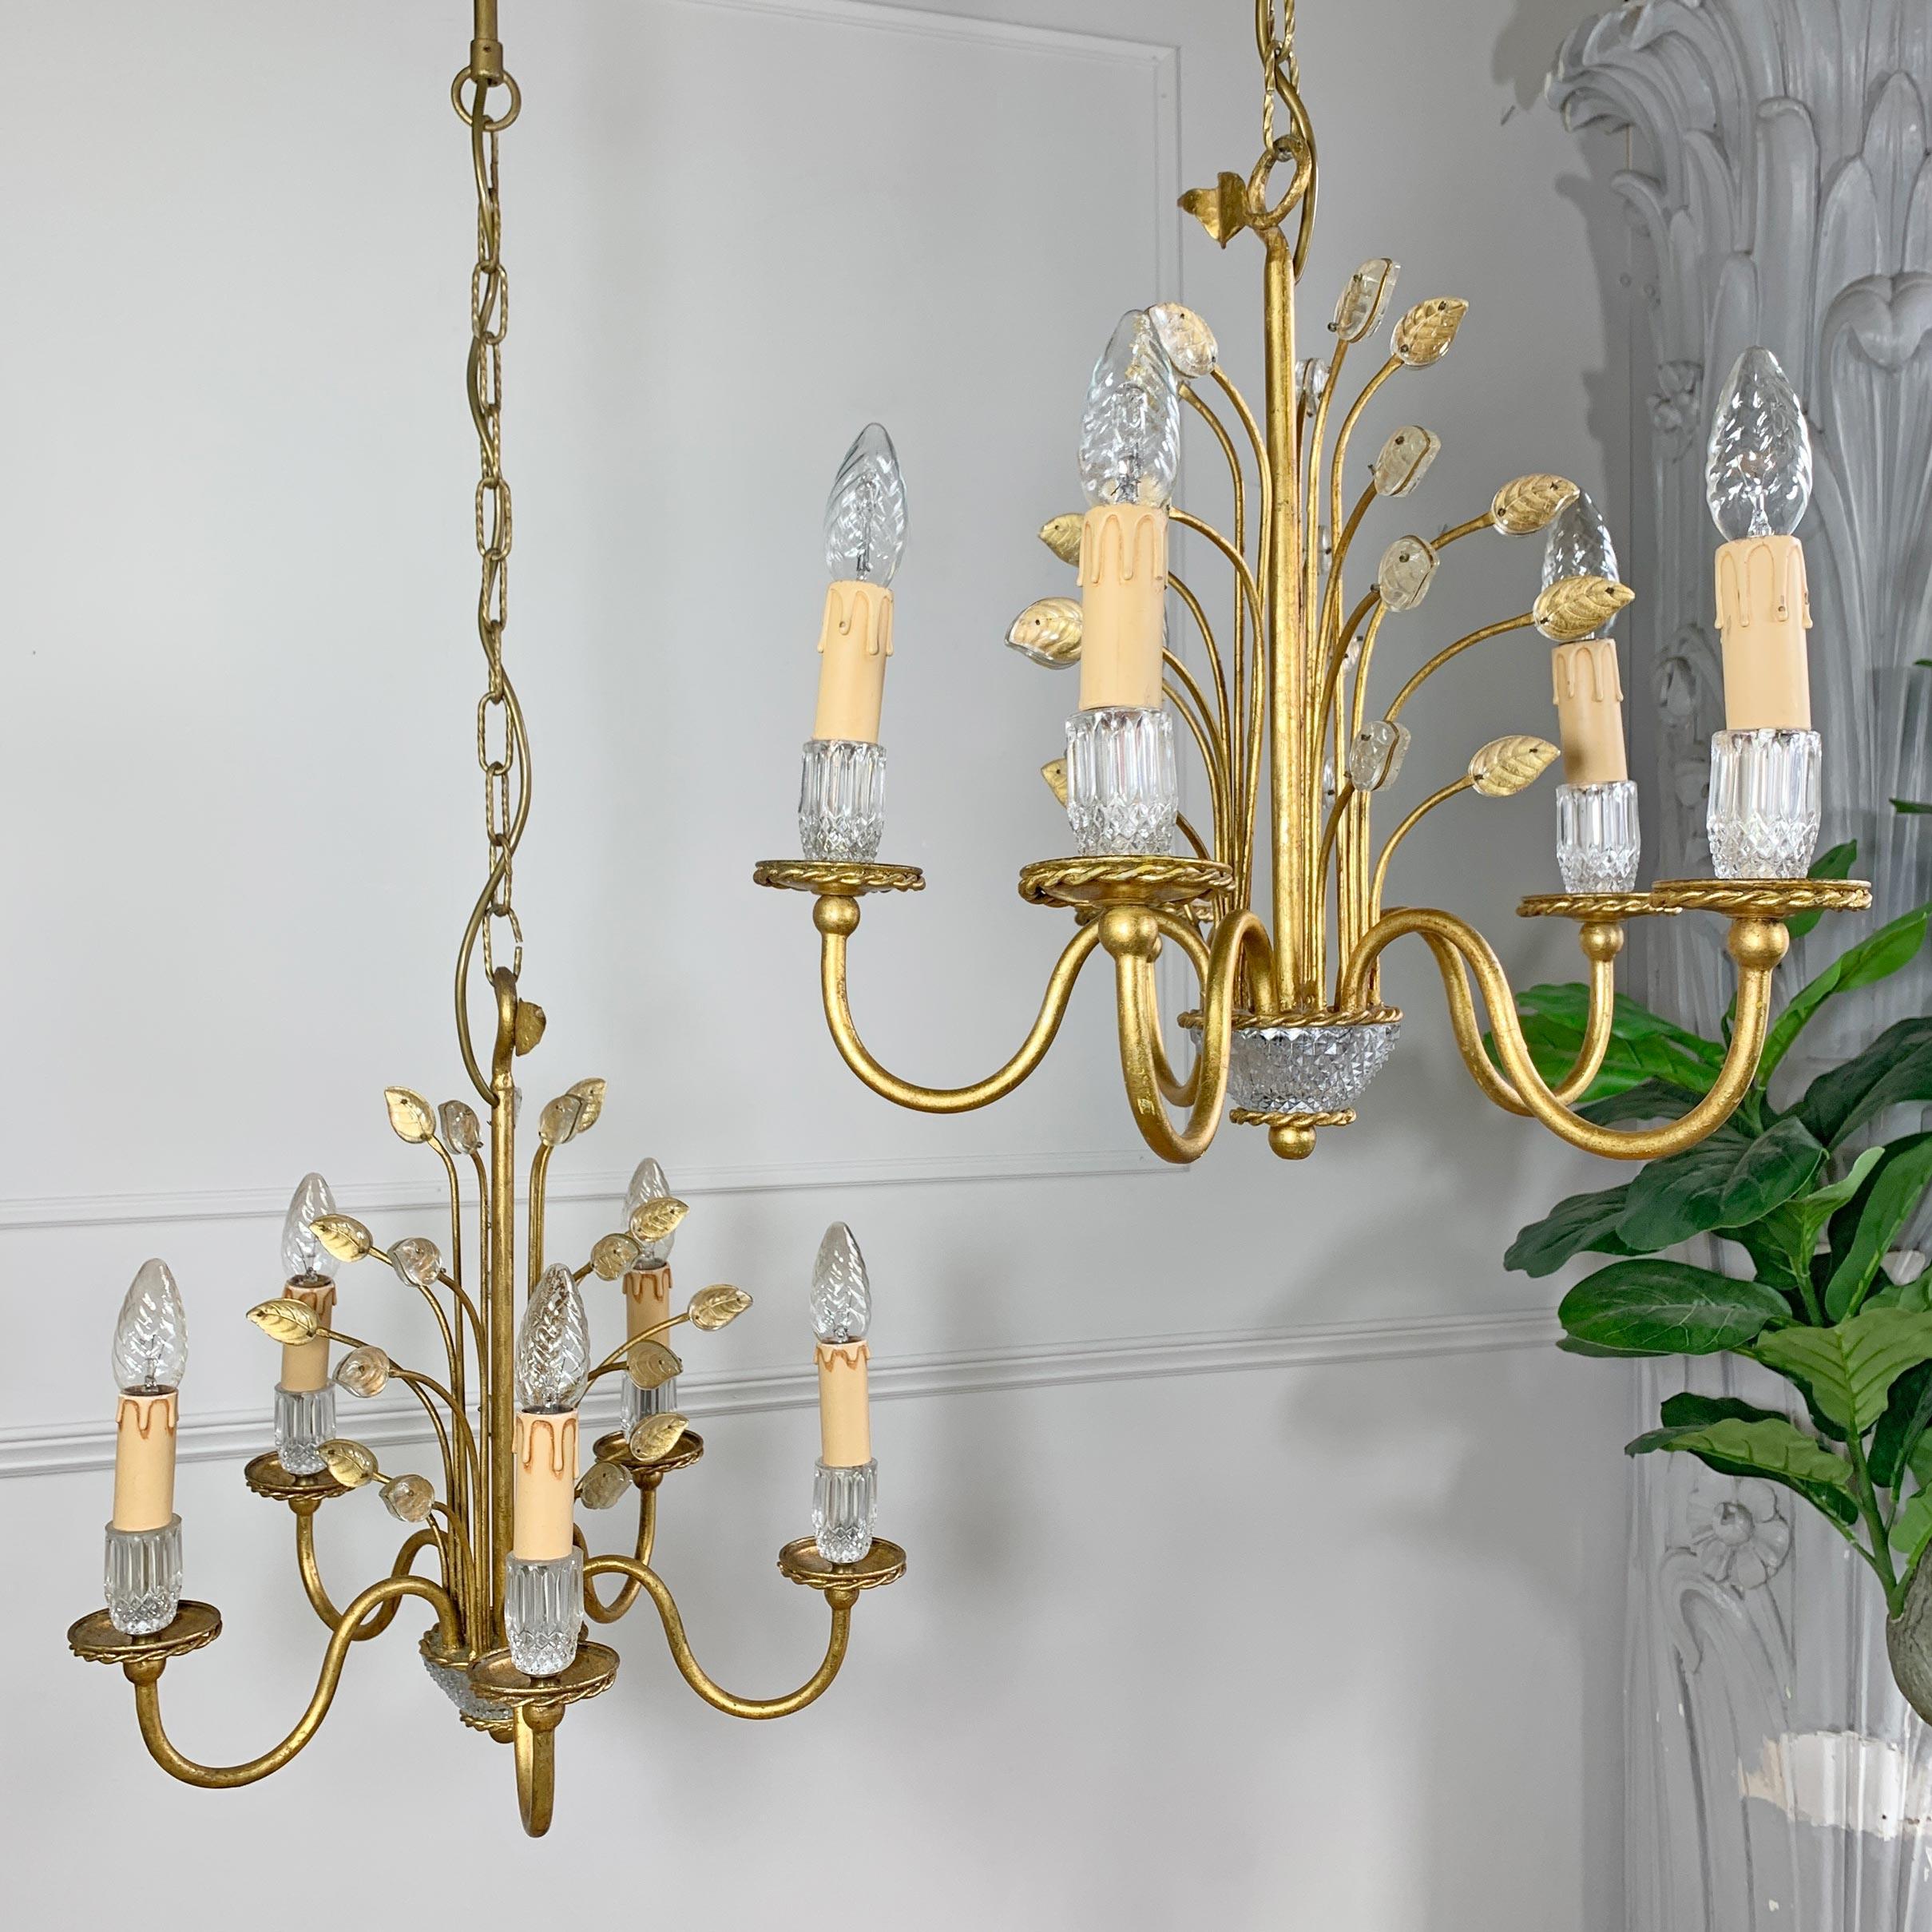 Hand-Crafted Banci Firenze Gilt and Murano Glass Leaf Chandelier